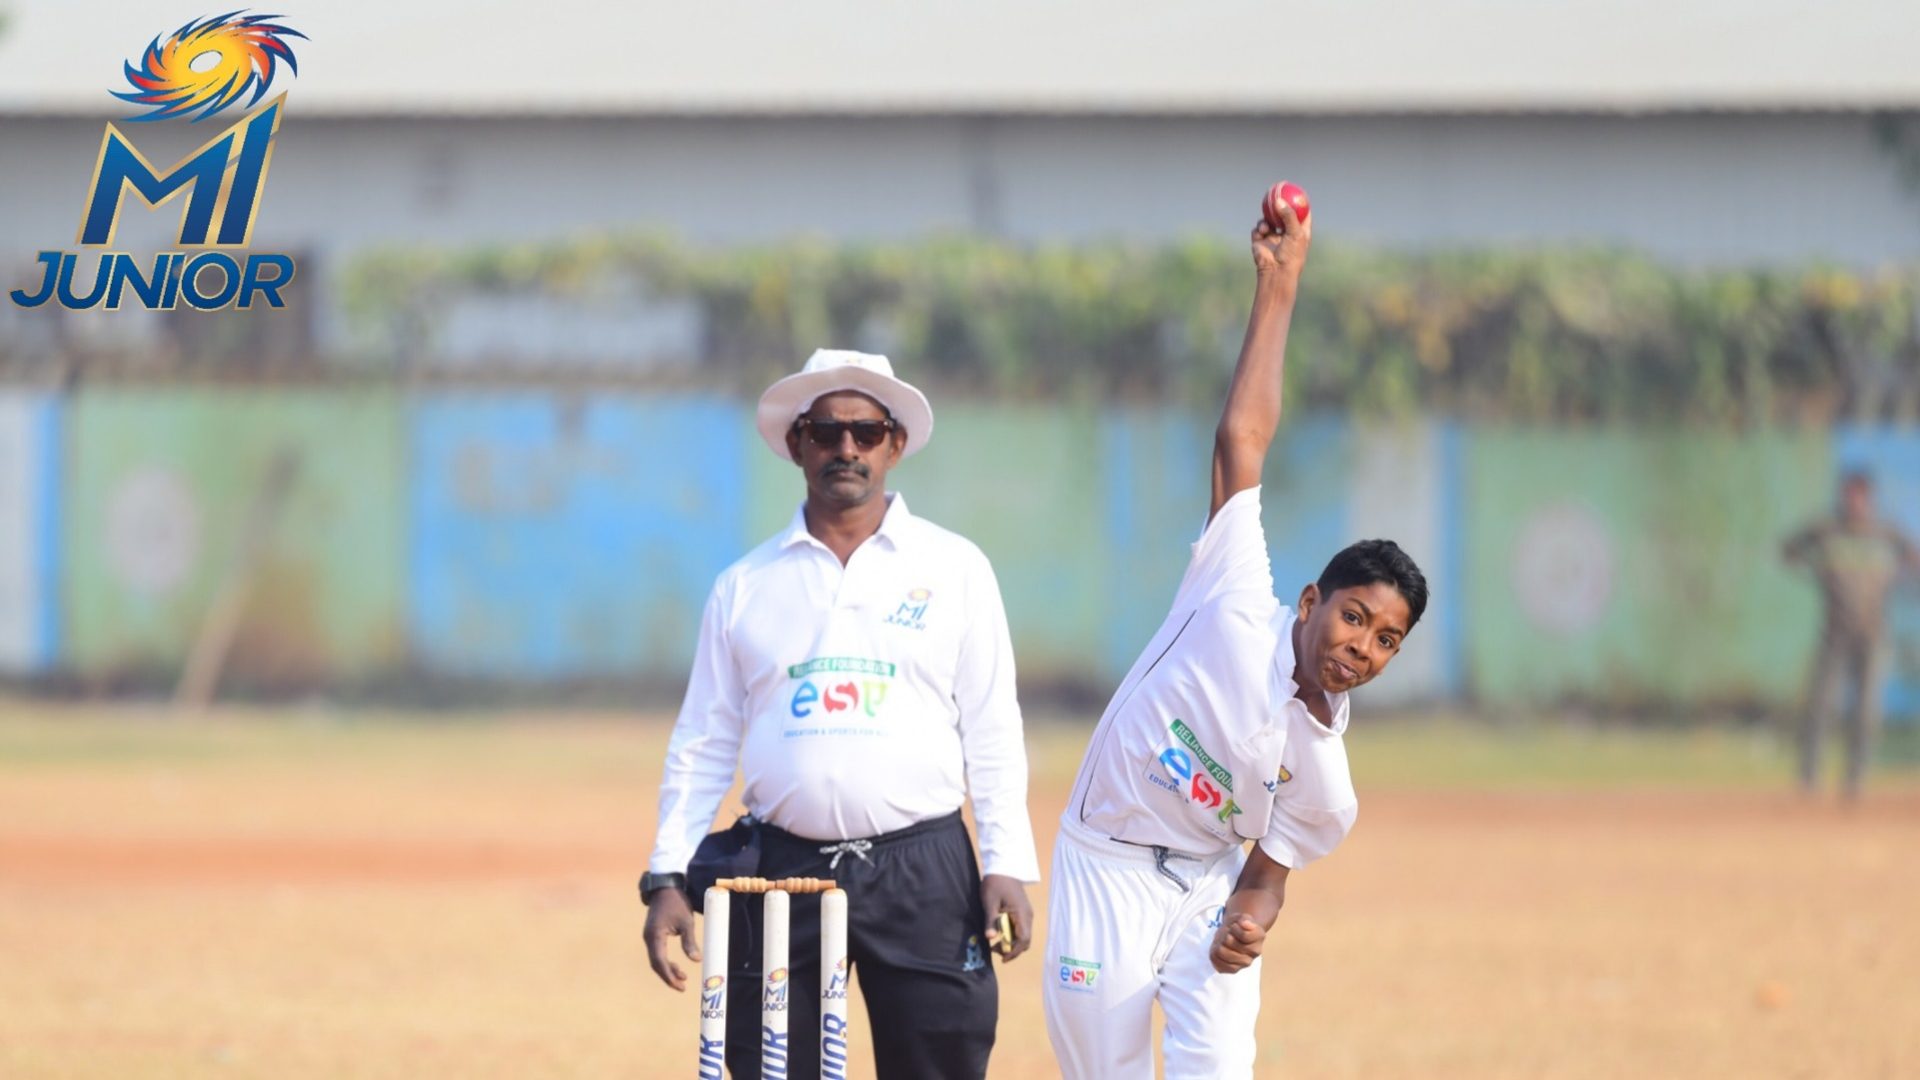 MI Junior Inter-school cricket tournament: Sudhan, Atharva, Aryan and  others shine for their teams - Mumbai Indians